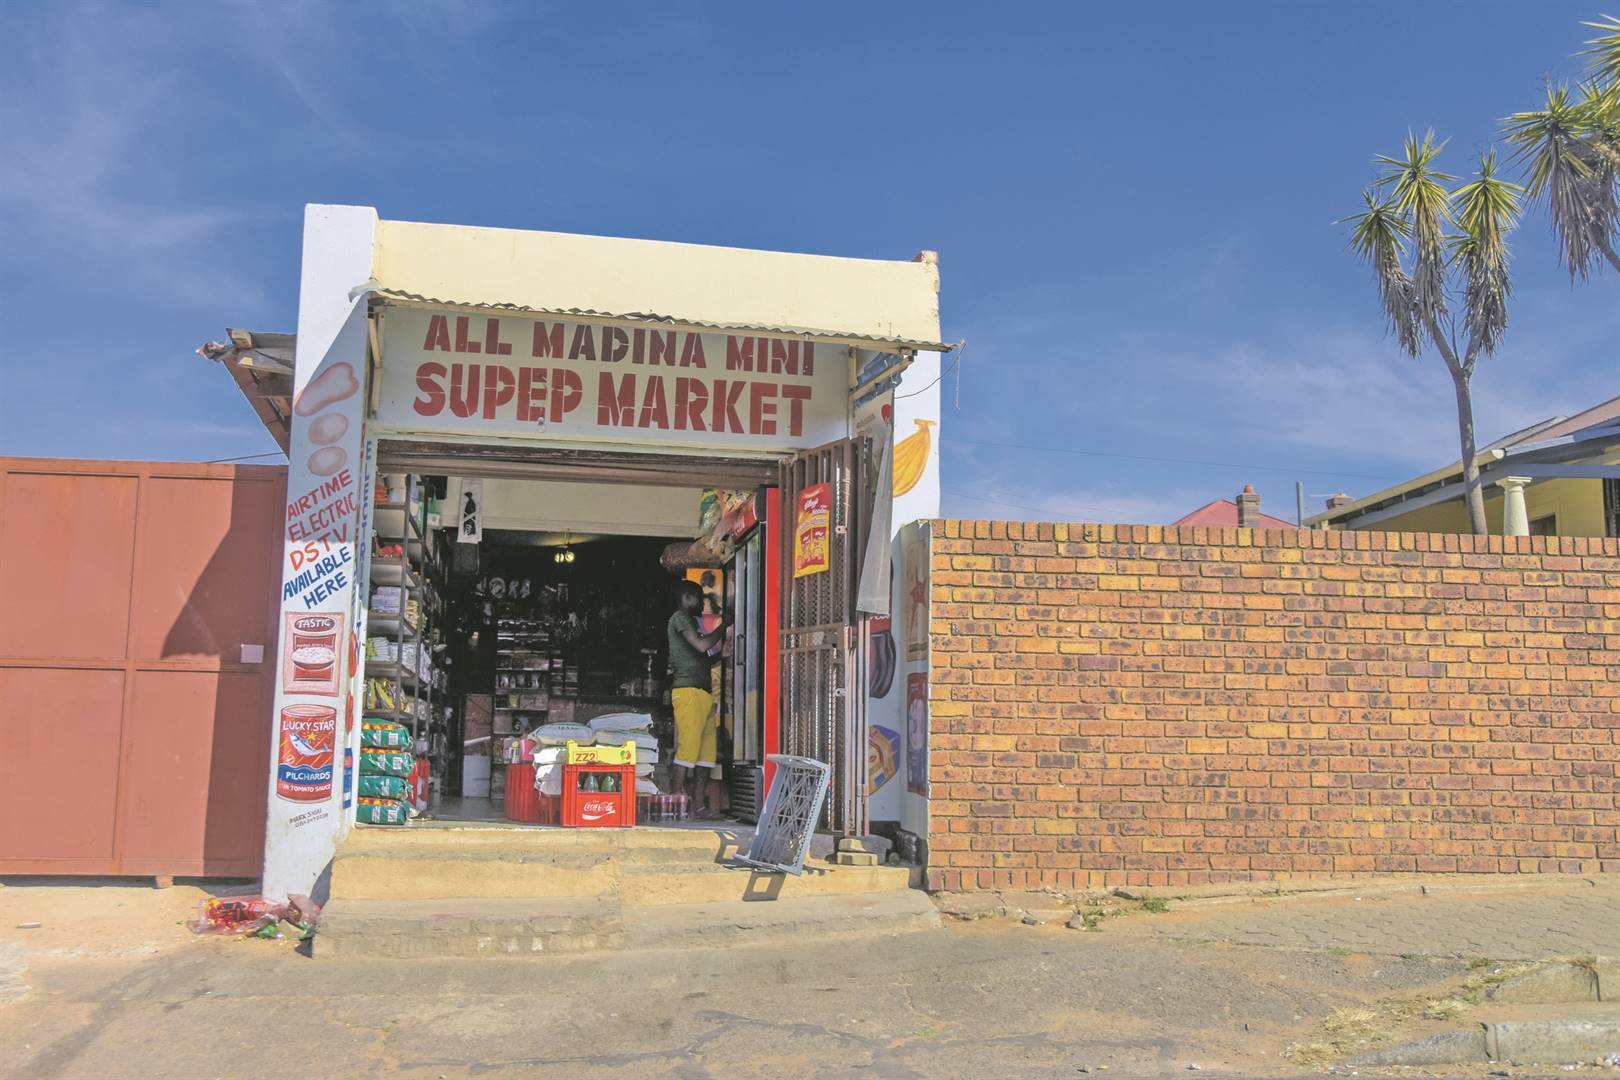 Spaza shops, while popular and convenient in the townships, are not advancing the economic empowerment of black people as some have argued. South Africa needs a more viable plan to achieve this. 